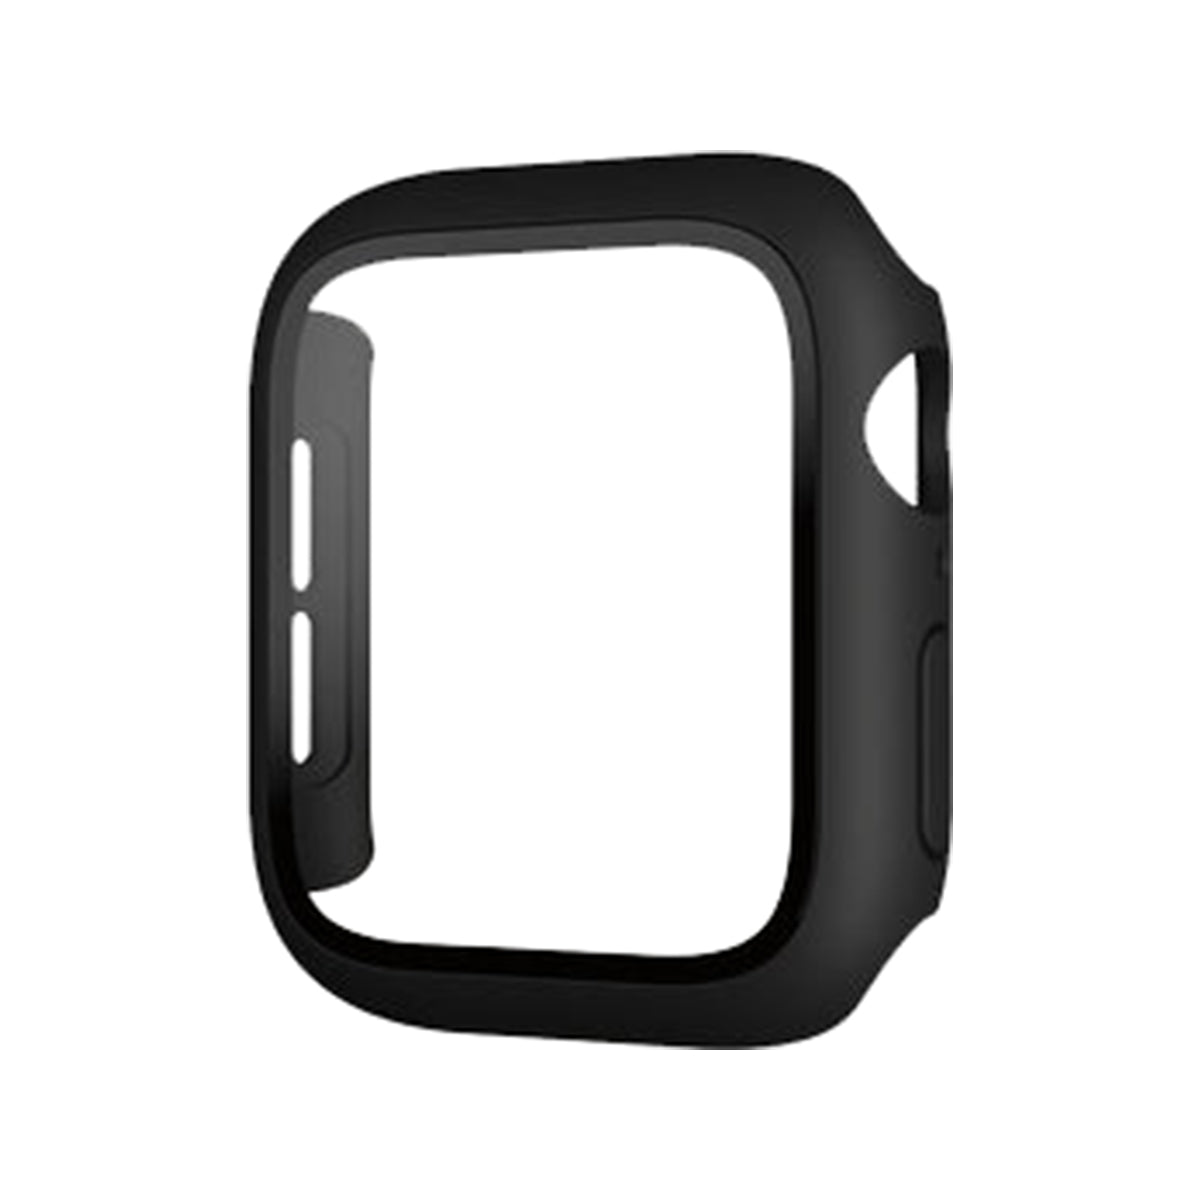 PanzerGlass Full Body Screen Protector for Apple Watch 4/5/6/SE 40mm - Black